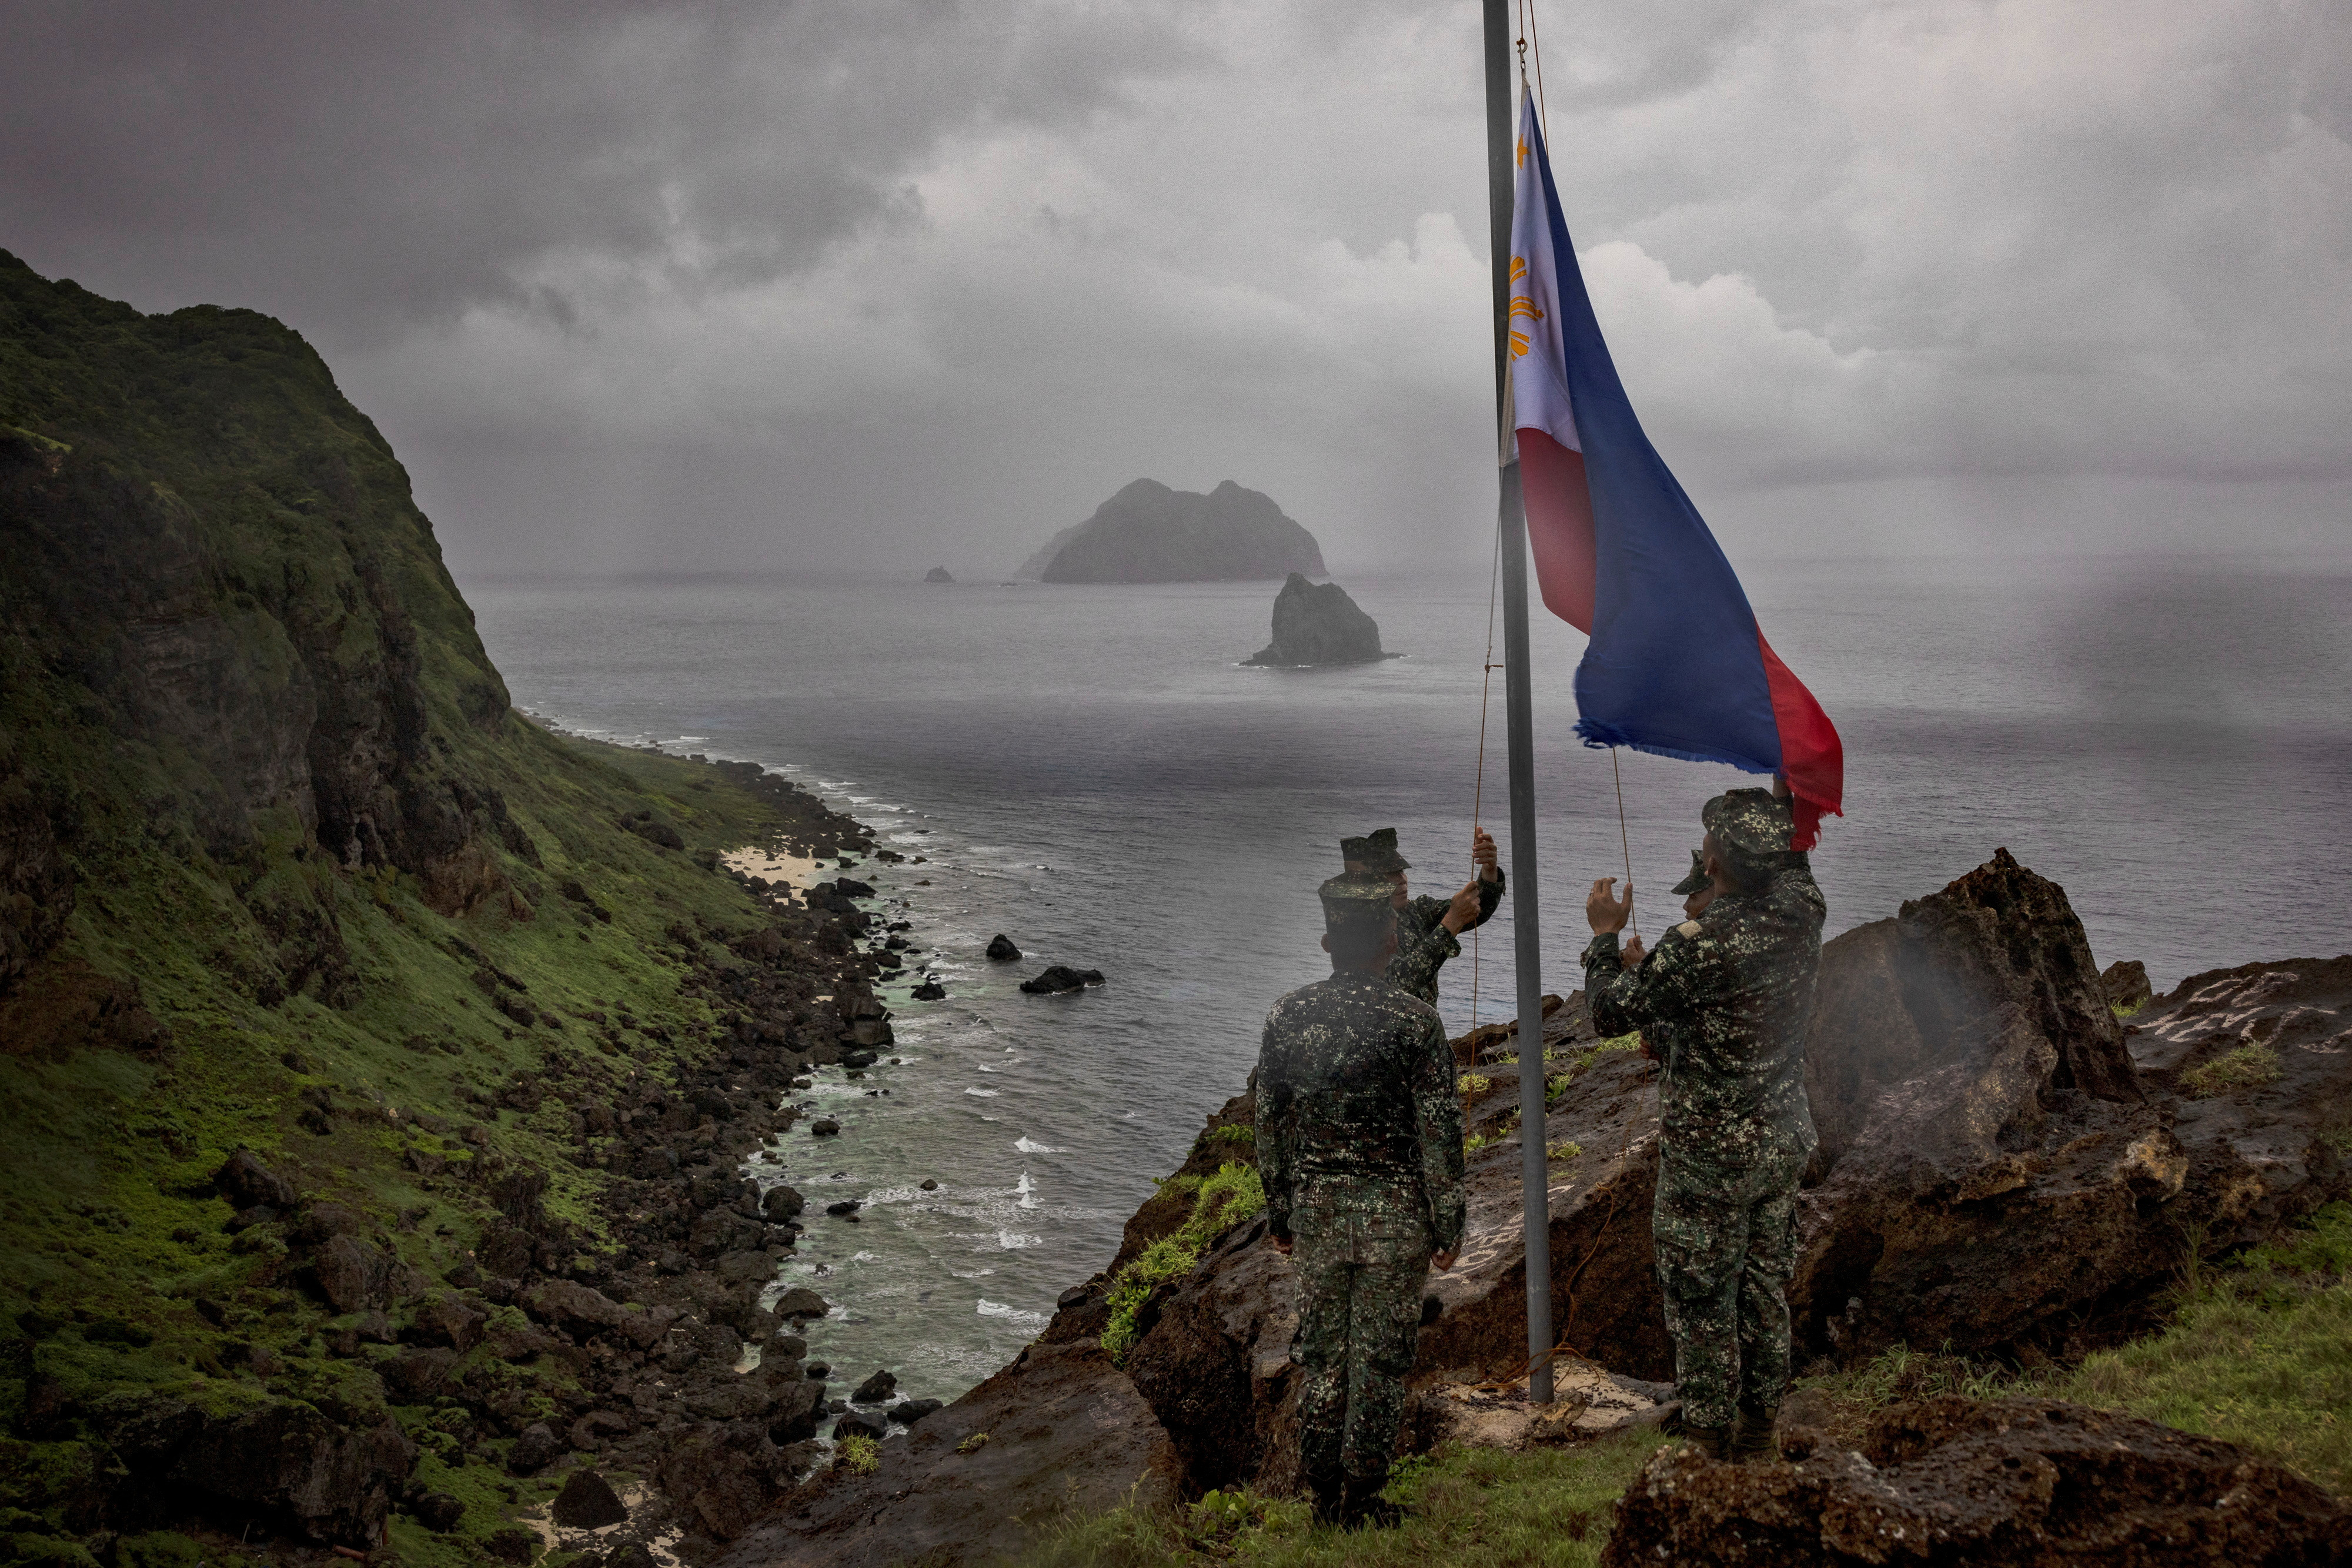 Armed Forces chief of the Philippines visits Batanes islands caught in US-China crosshairs